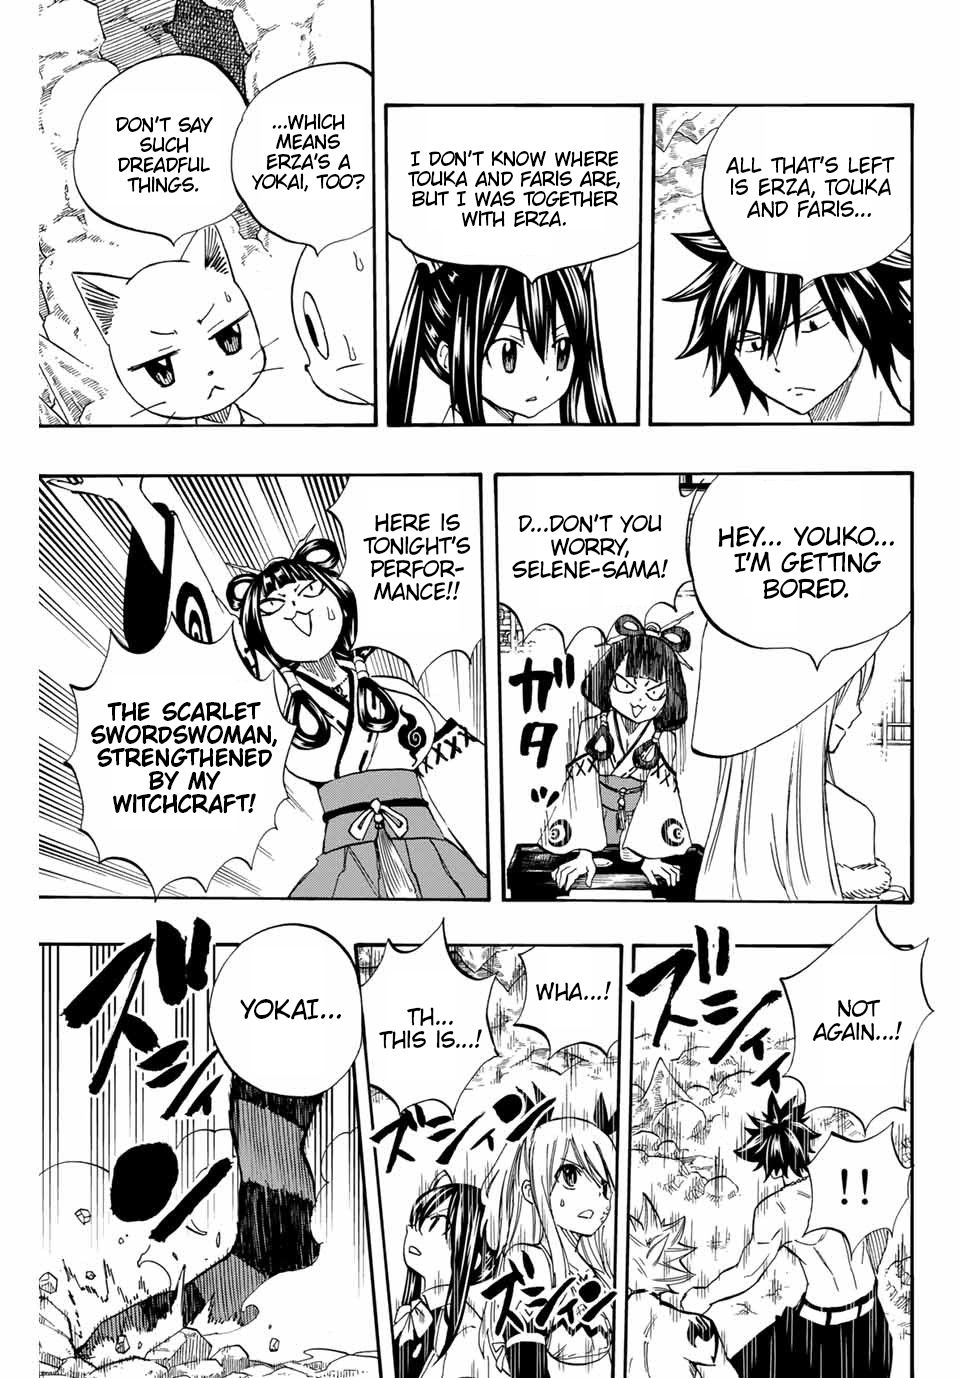 Read Manga Fairy Tail 100 Years Quest Chapter 76 Read Manga Online In English Free Manga Reading